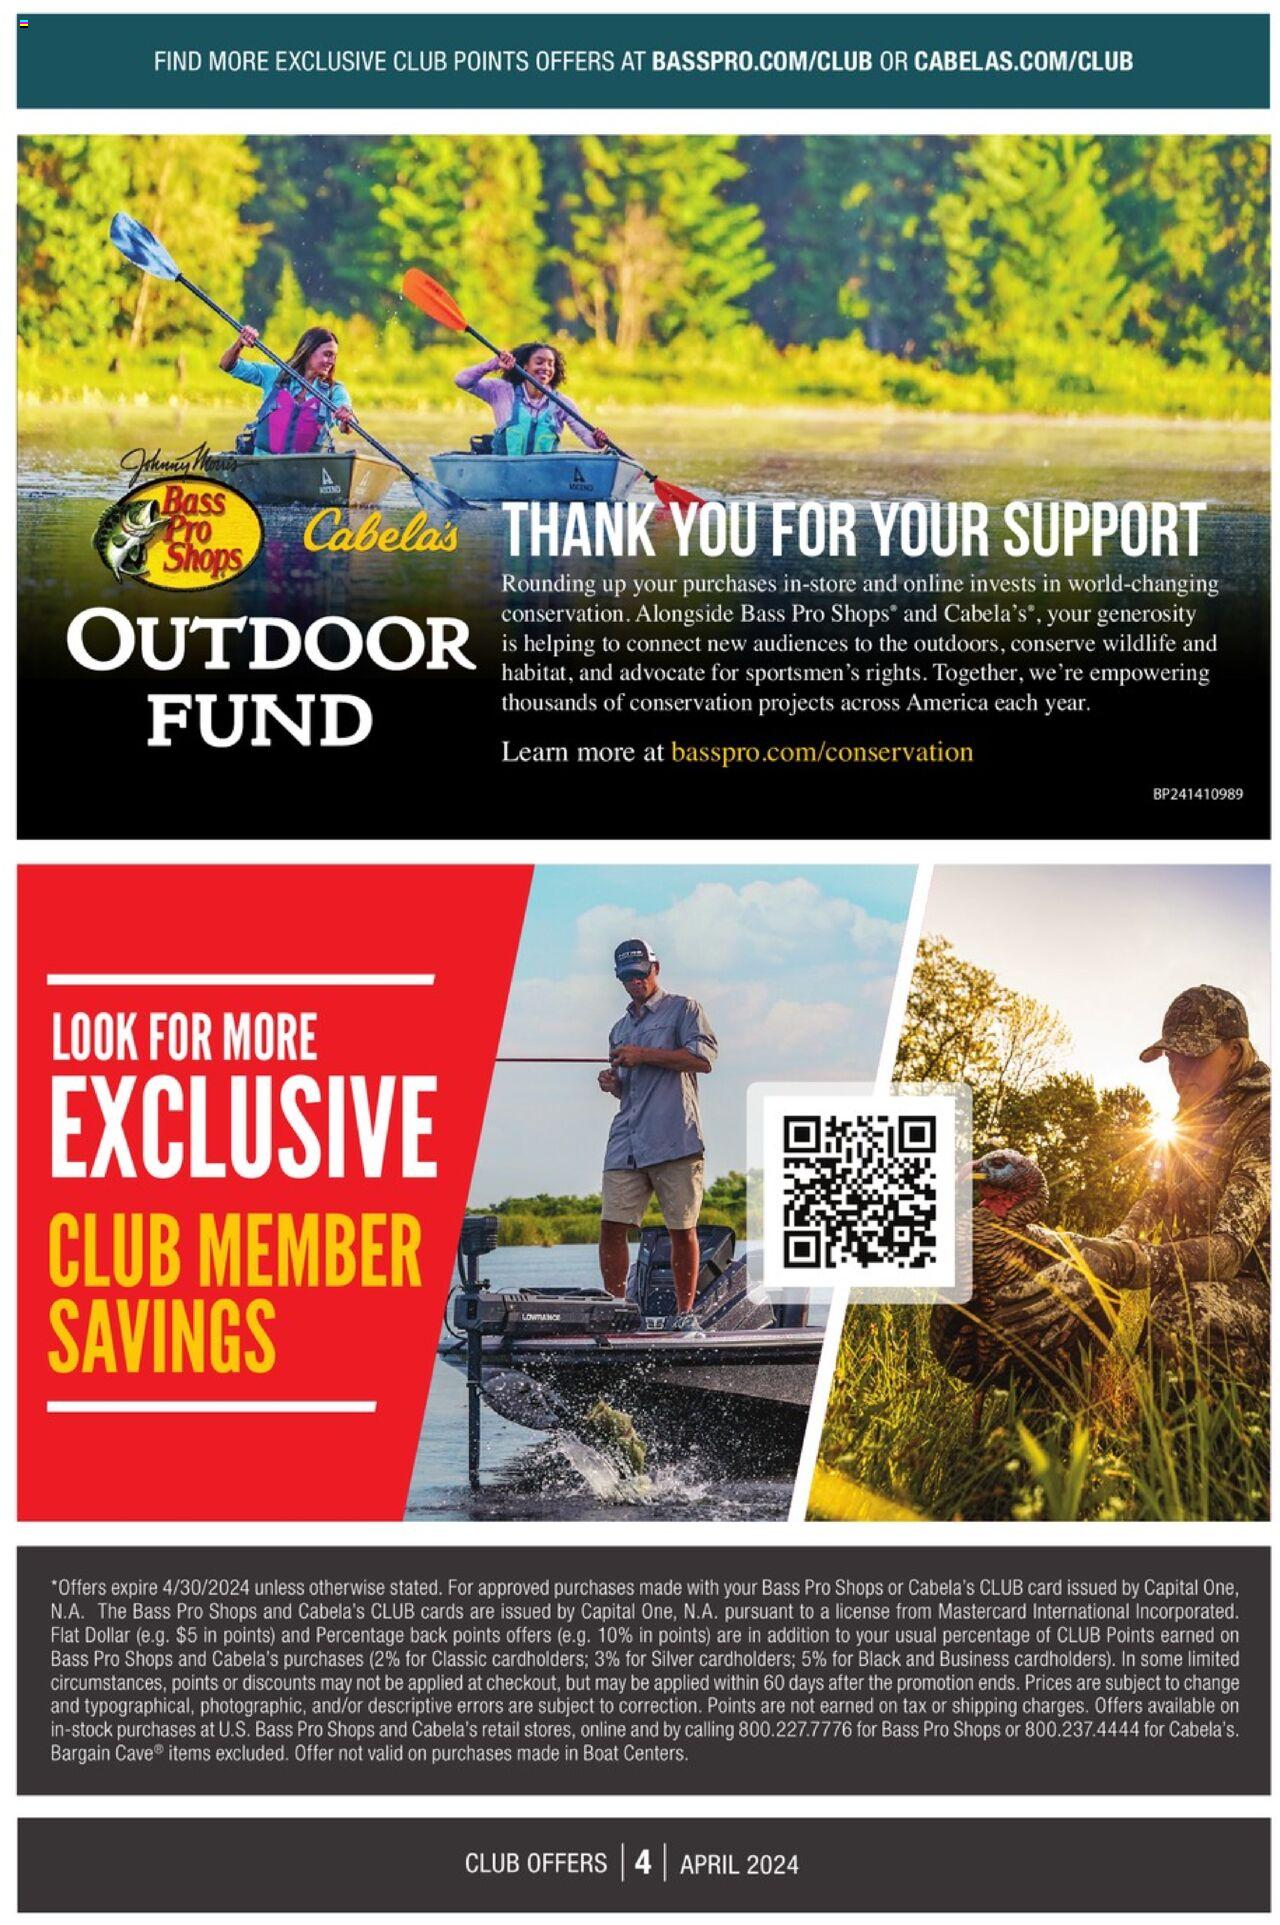 Bass Pro Shops - Members Only Exclusive Club Offers - Page 4